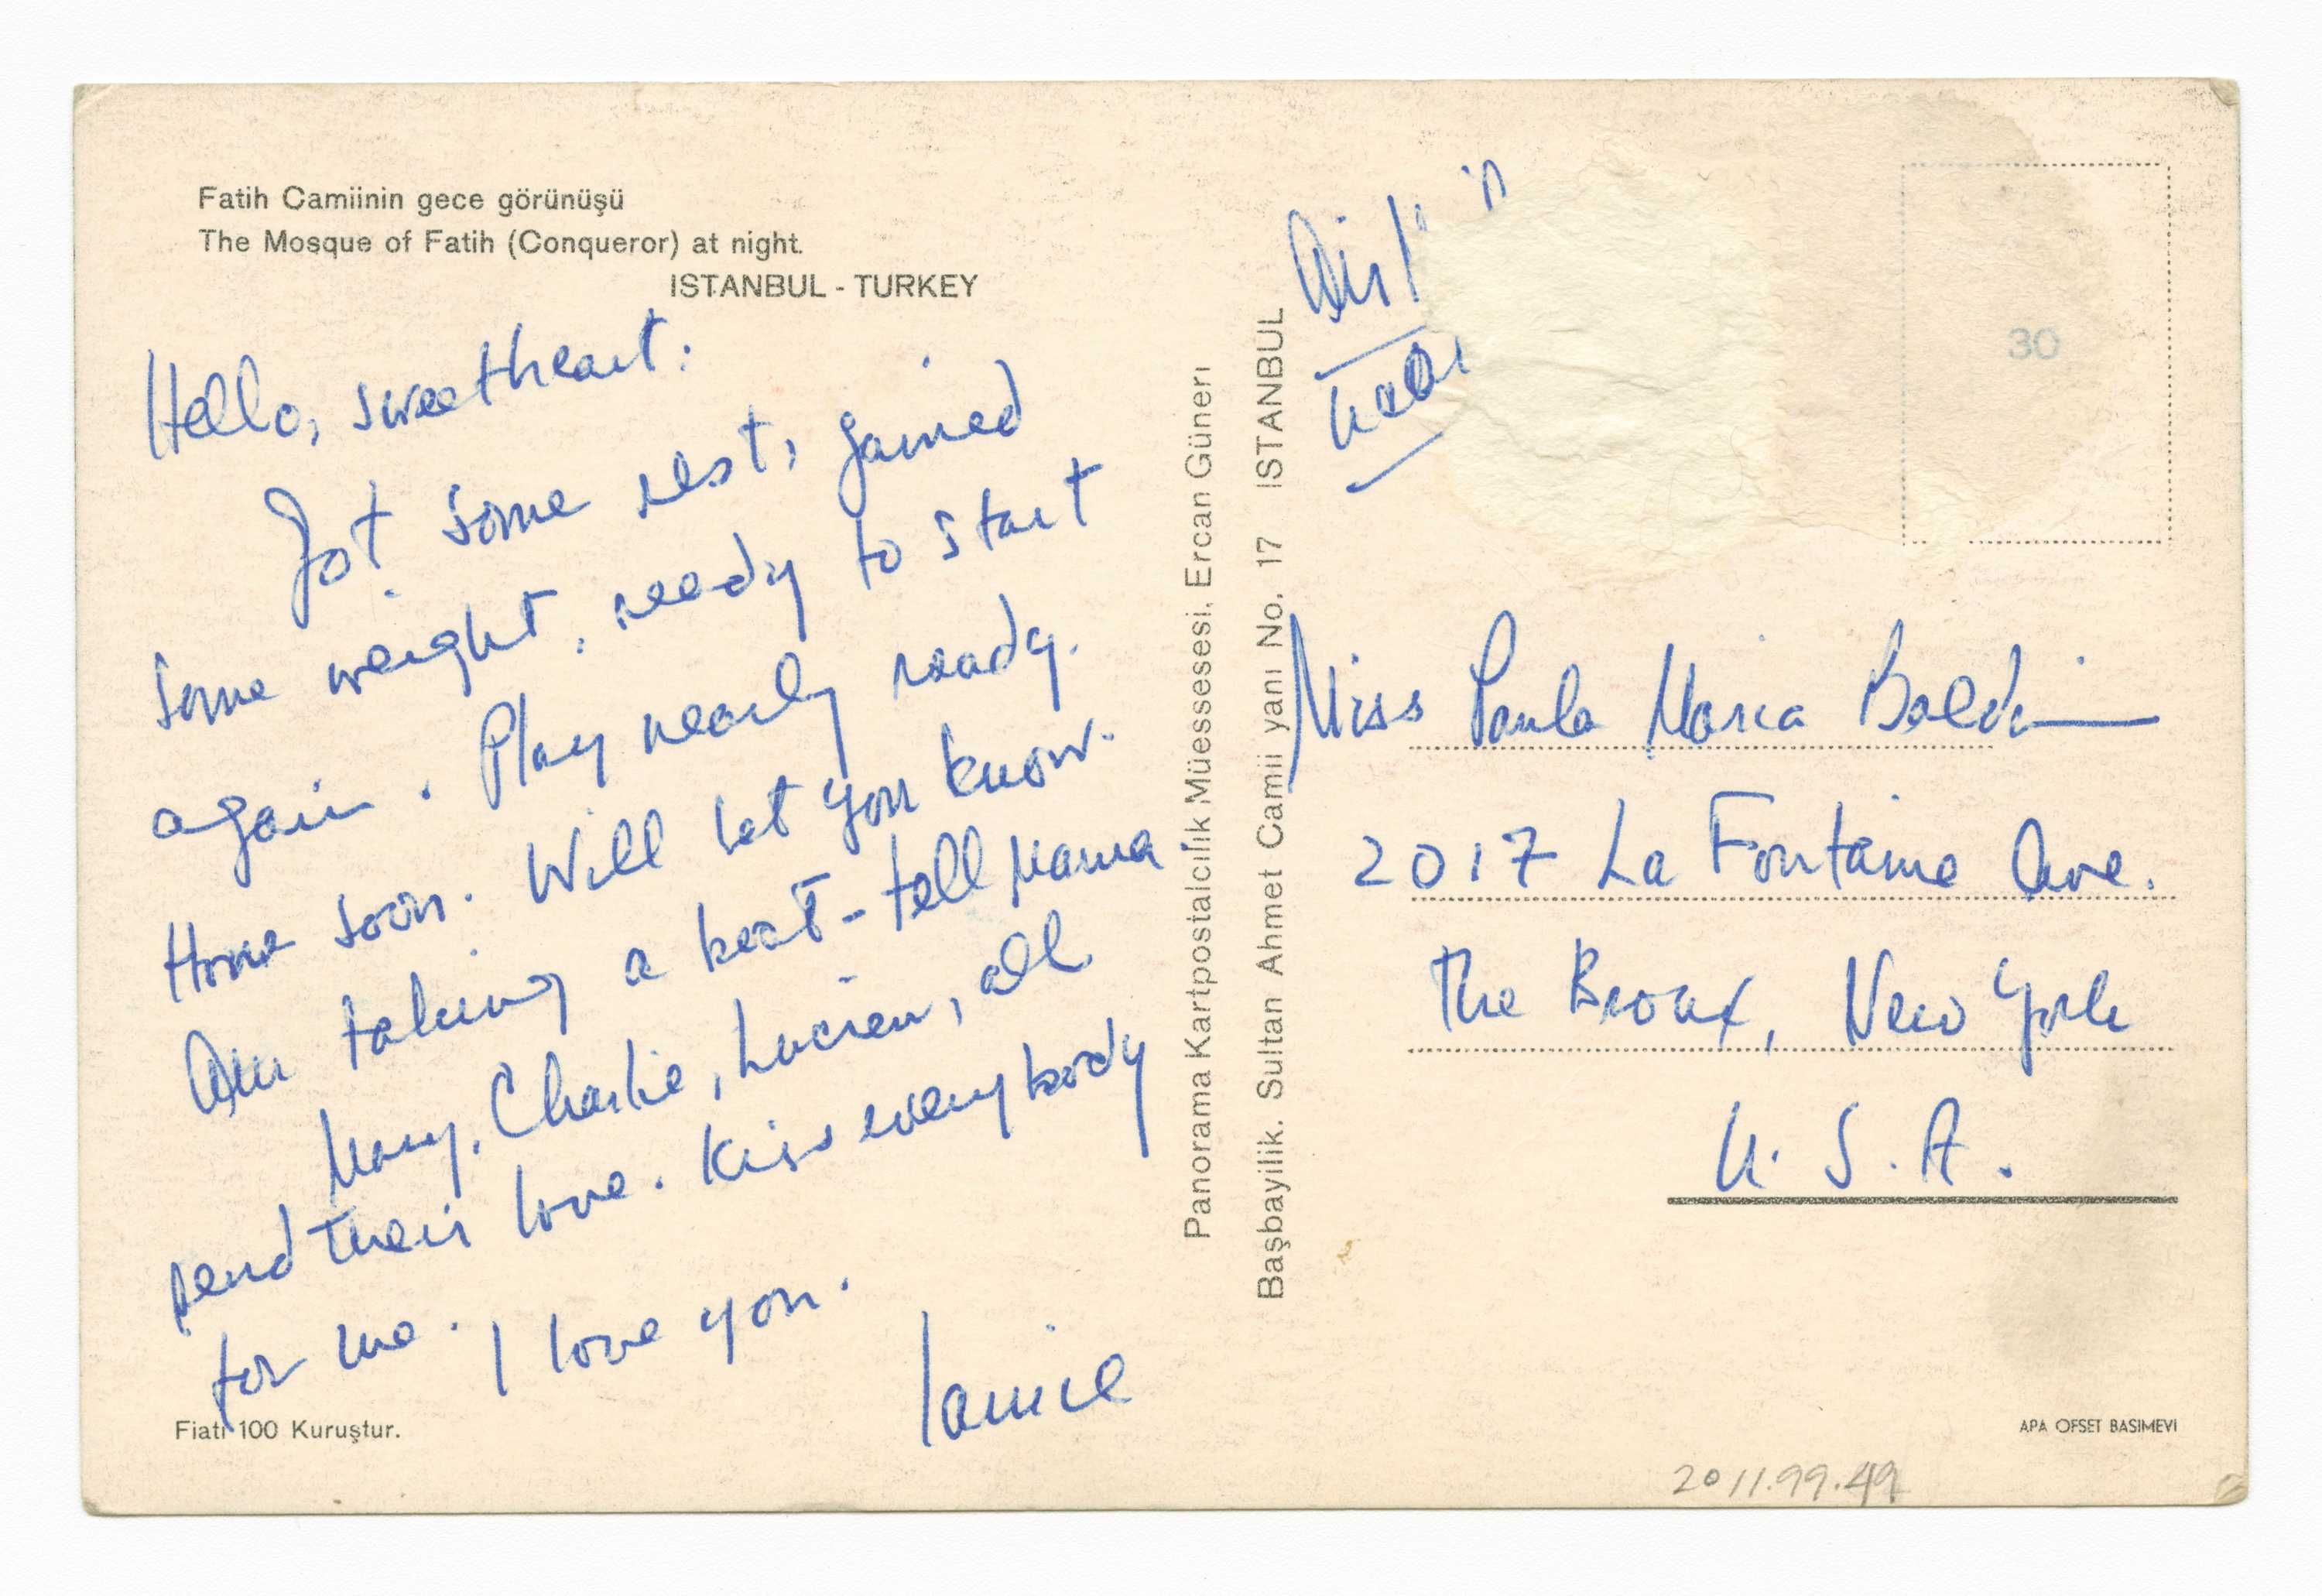 A handwritten postcard from James Baldwin to his sister, Paula Baldwin in which James tells his sister that he has "got some rest, gained some weight, [and is] ready to start again." The front of the postcard depicts the Fatih Mosque in Istanbul.